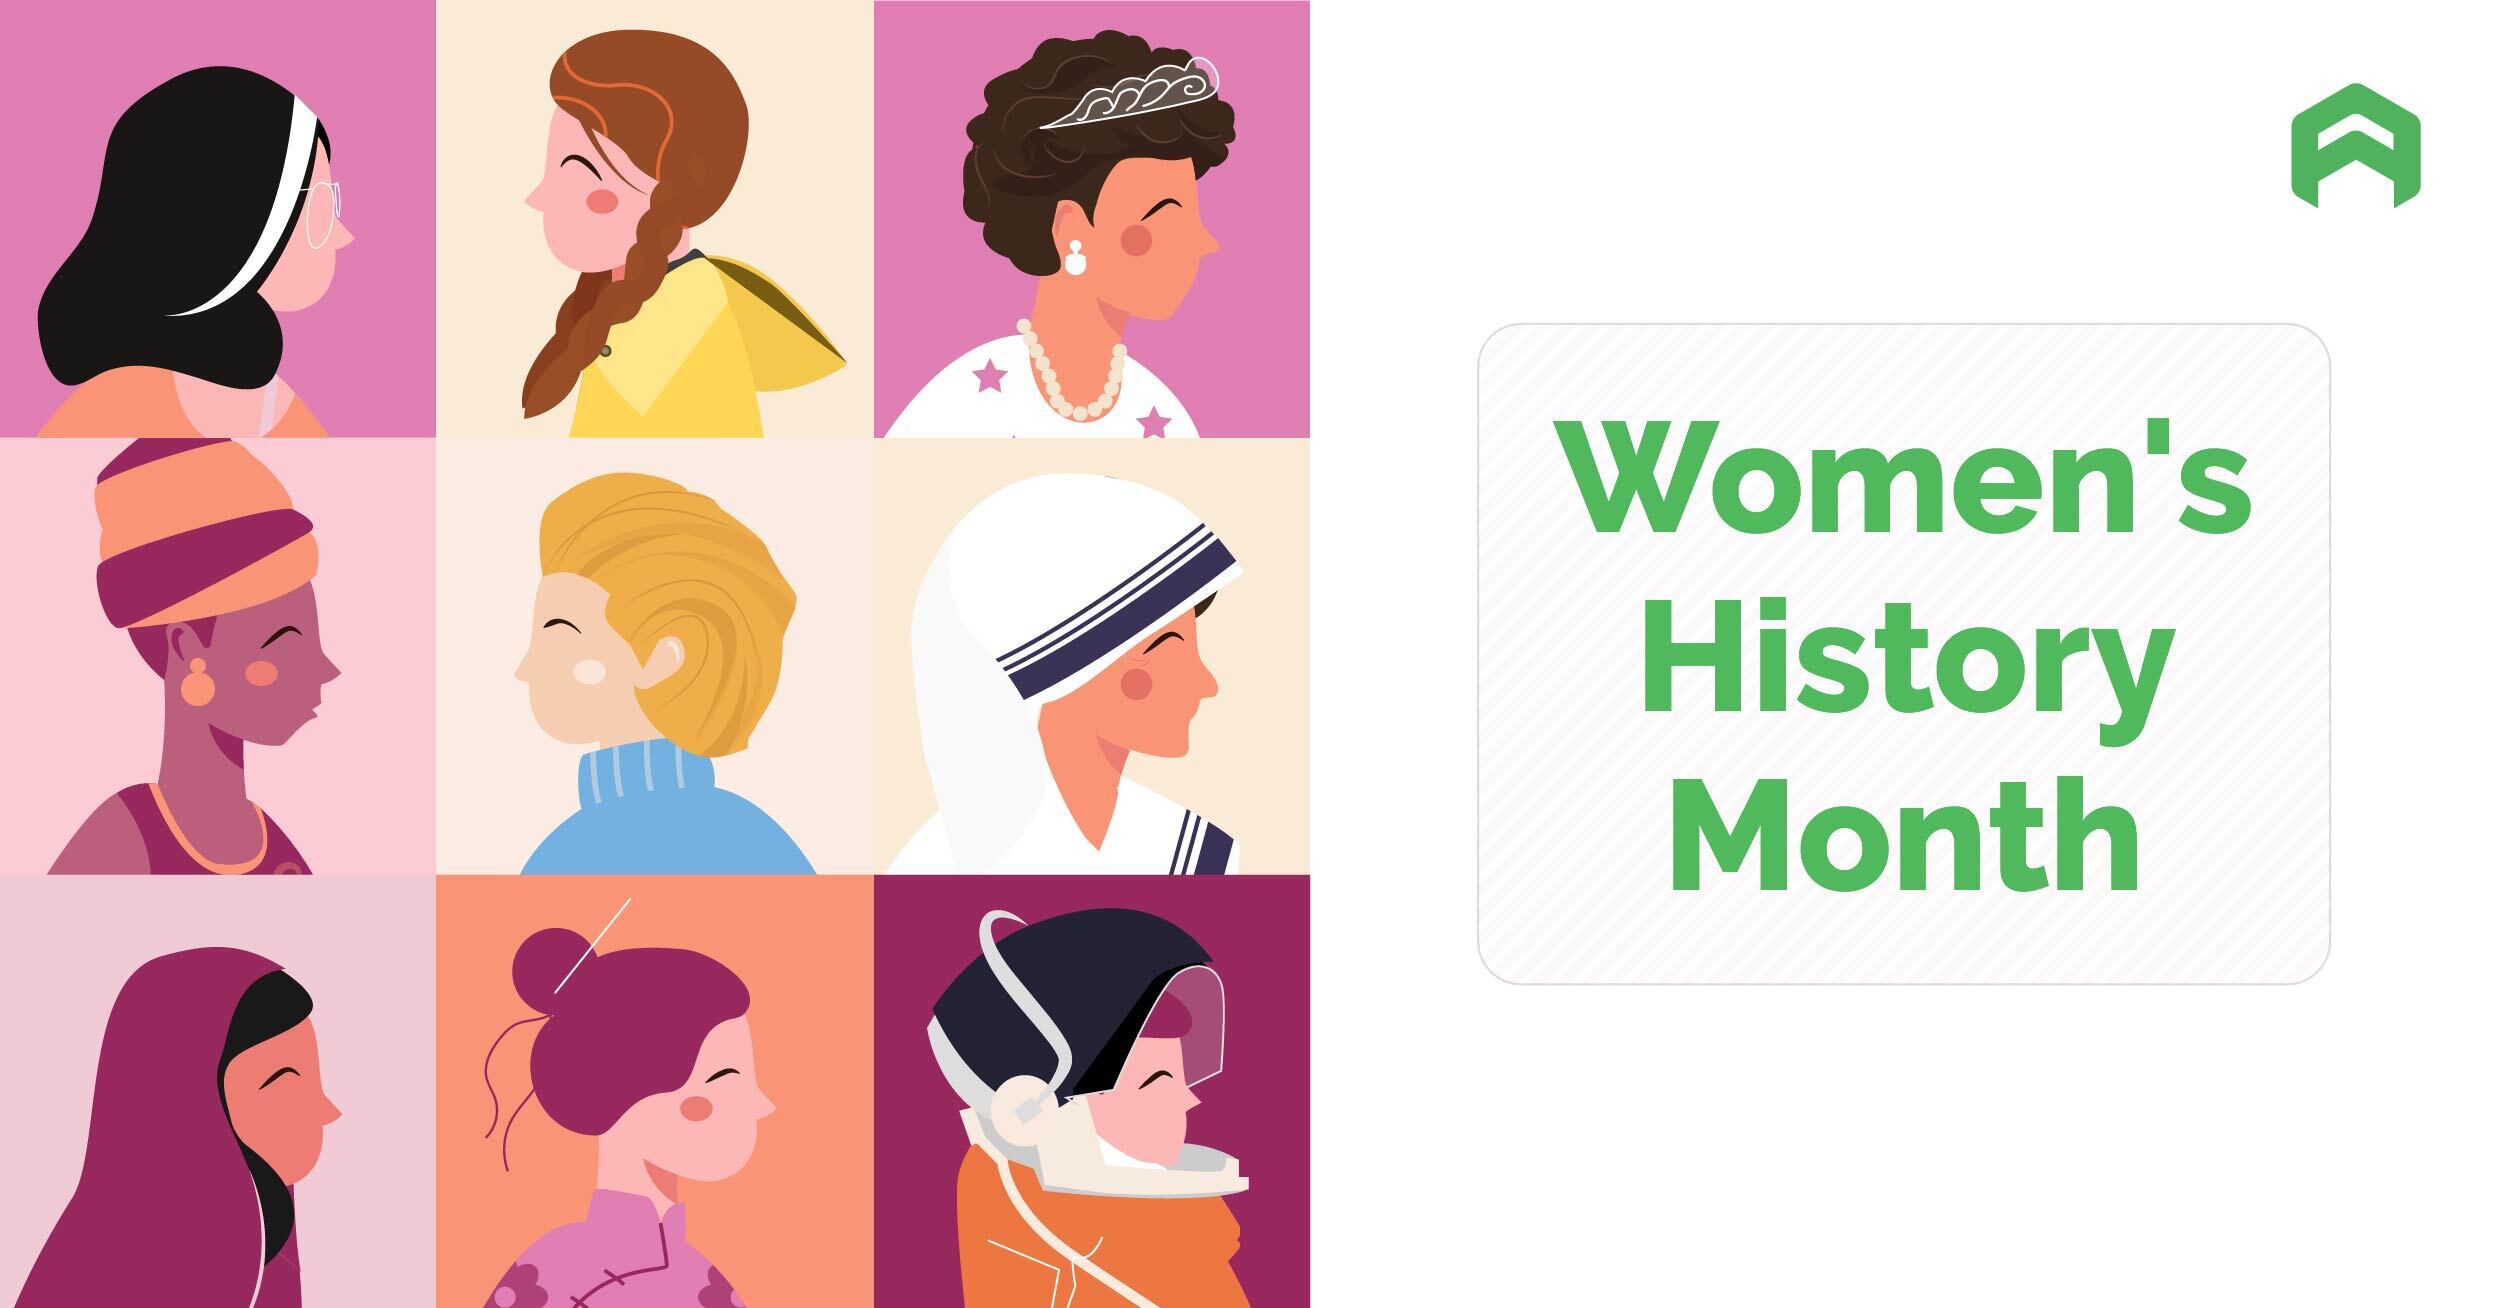 9 women representing various cultures for women's history month